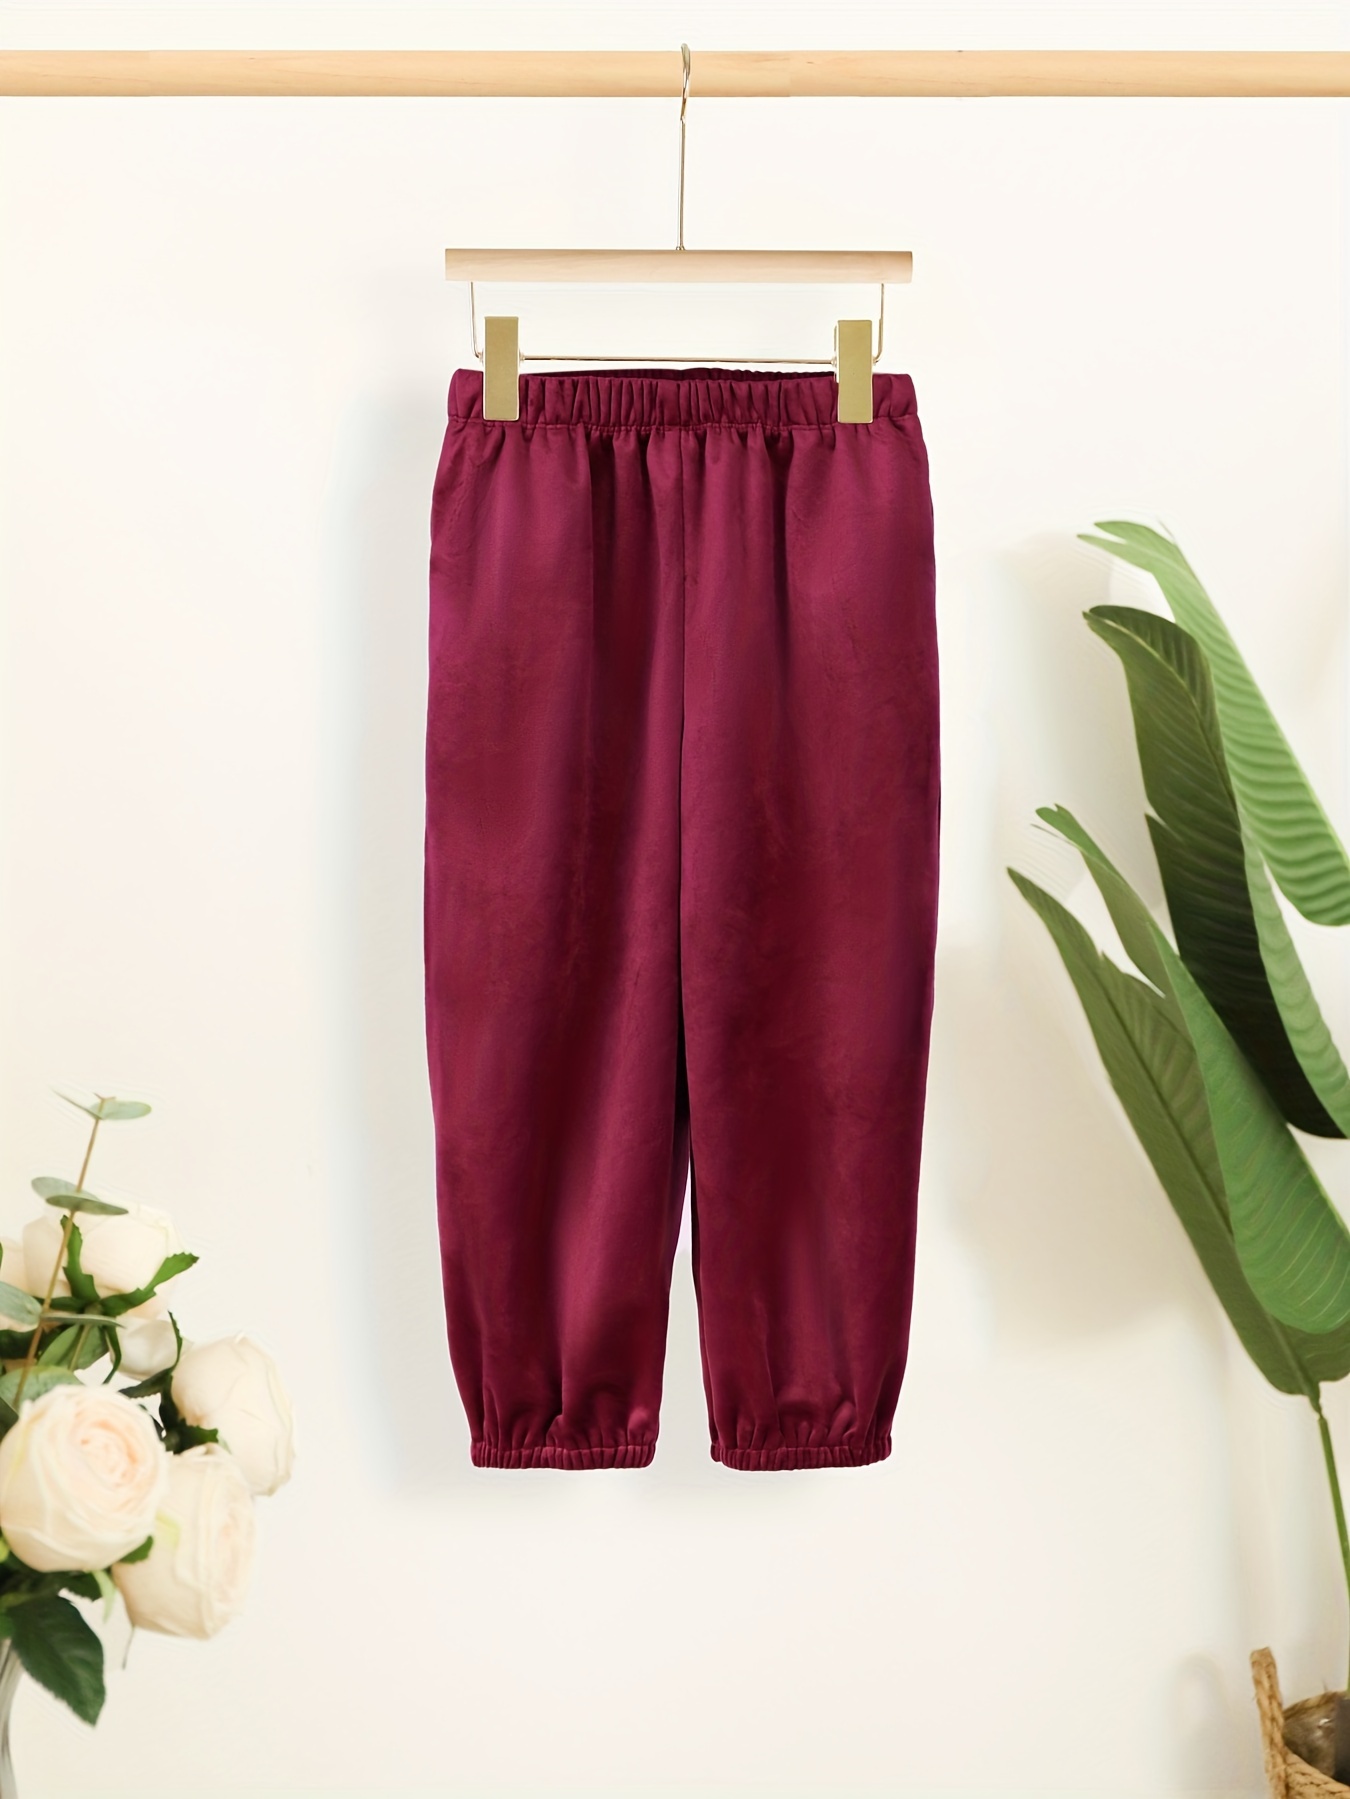 Velvet Floral Pants - Holiday Outfits